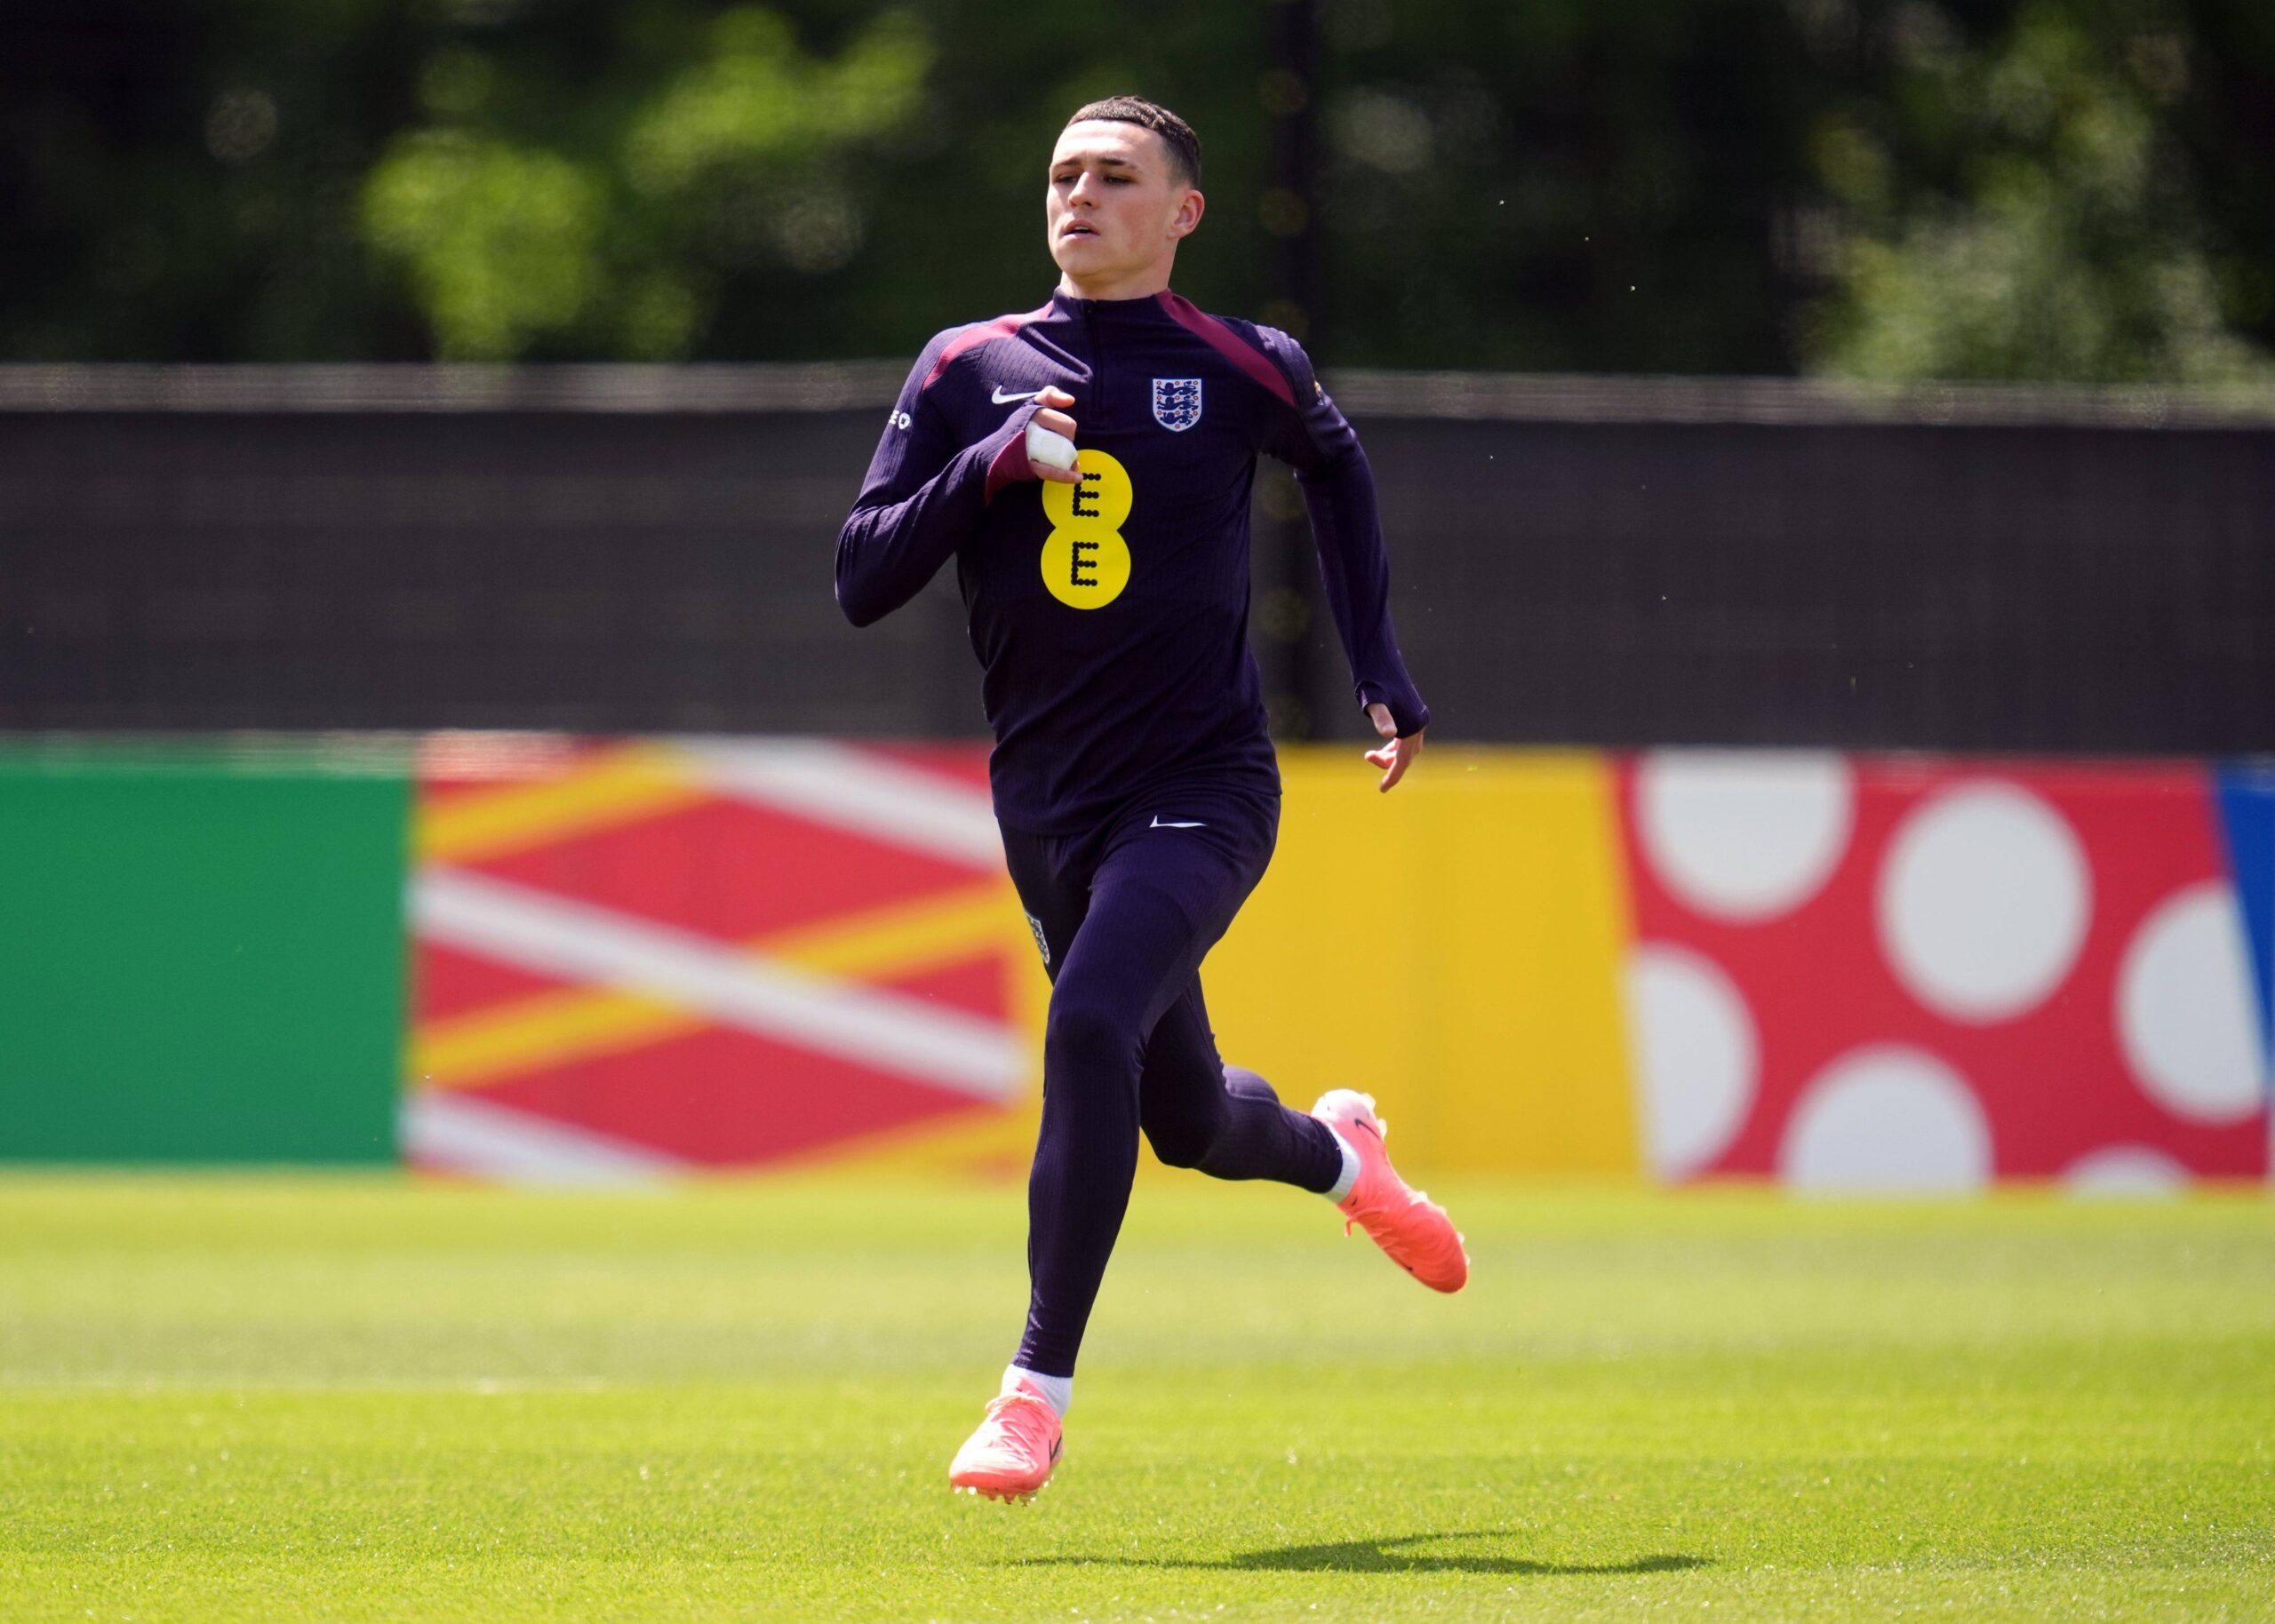 Stones: Foden to Shine at Euro 2024, Making Up for Missed Final in Previous Edition